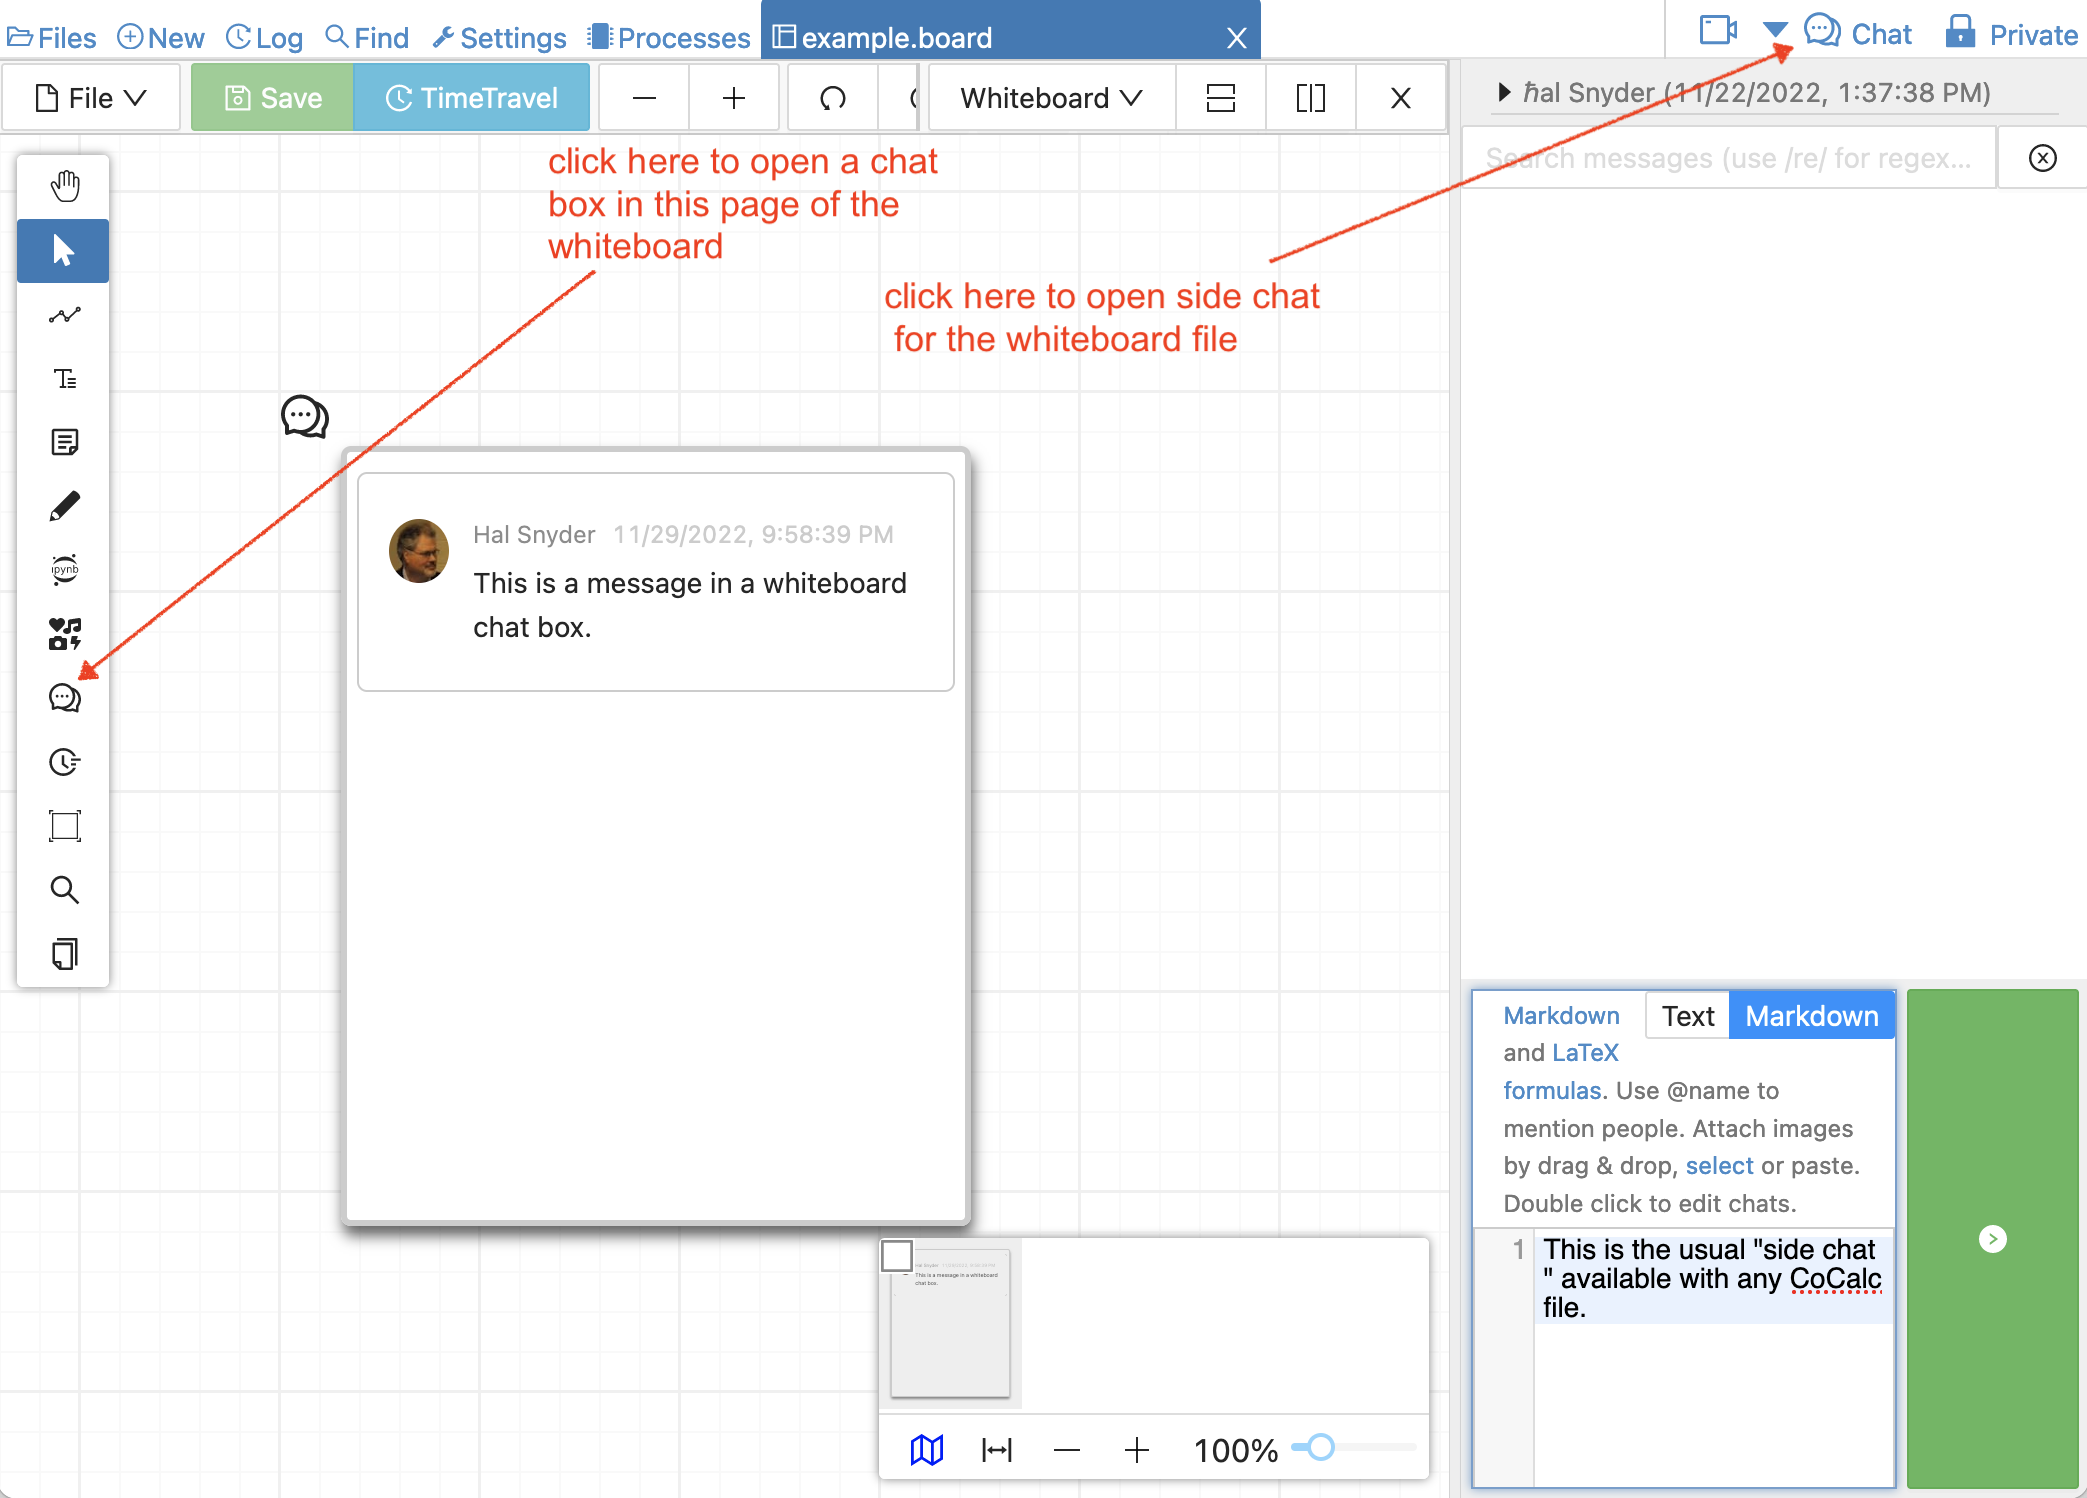 example chat box and side chat in whiteboard